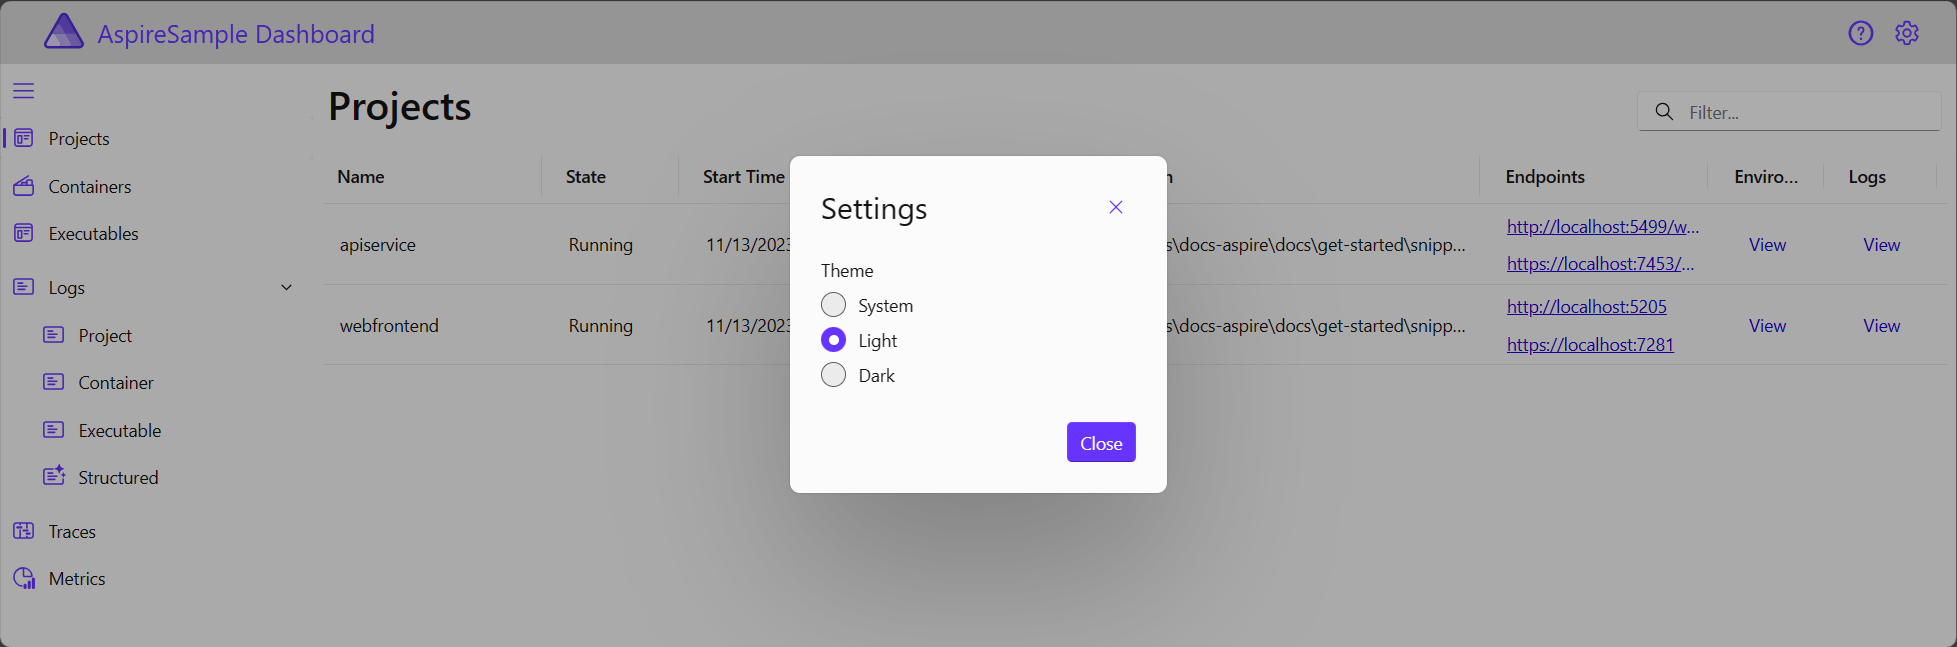 The .NET Aspire dashboard Settings dialog, showing the Light theme selection.